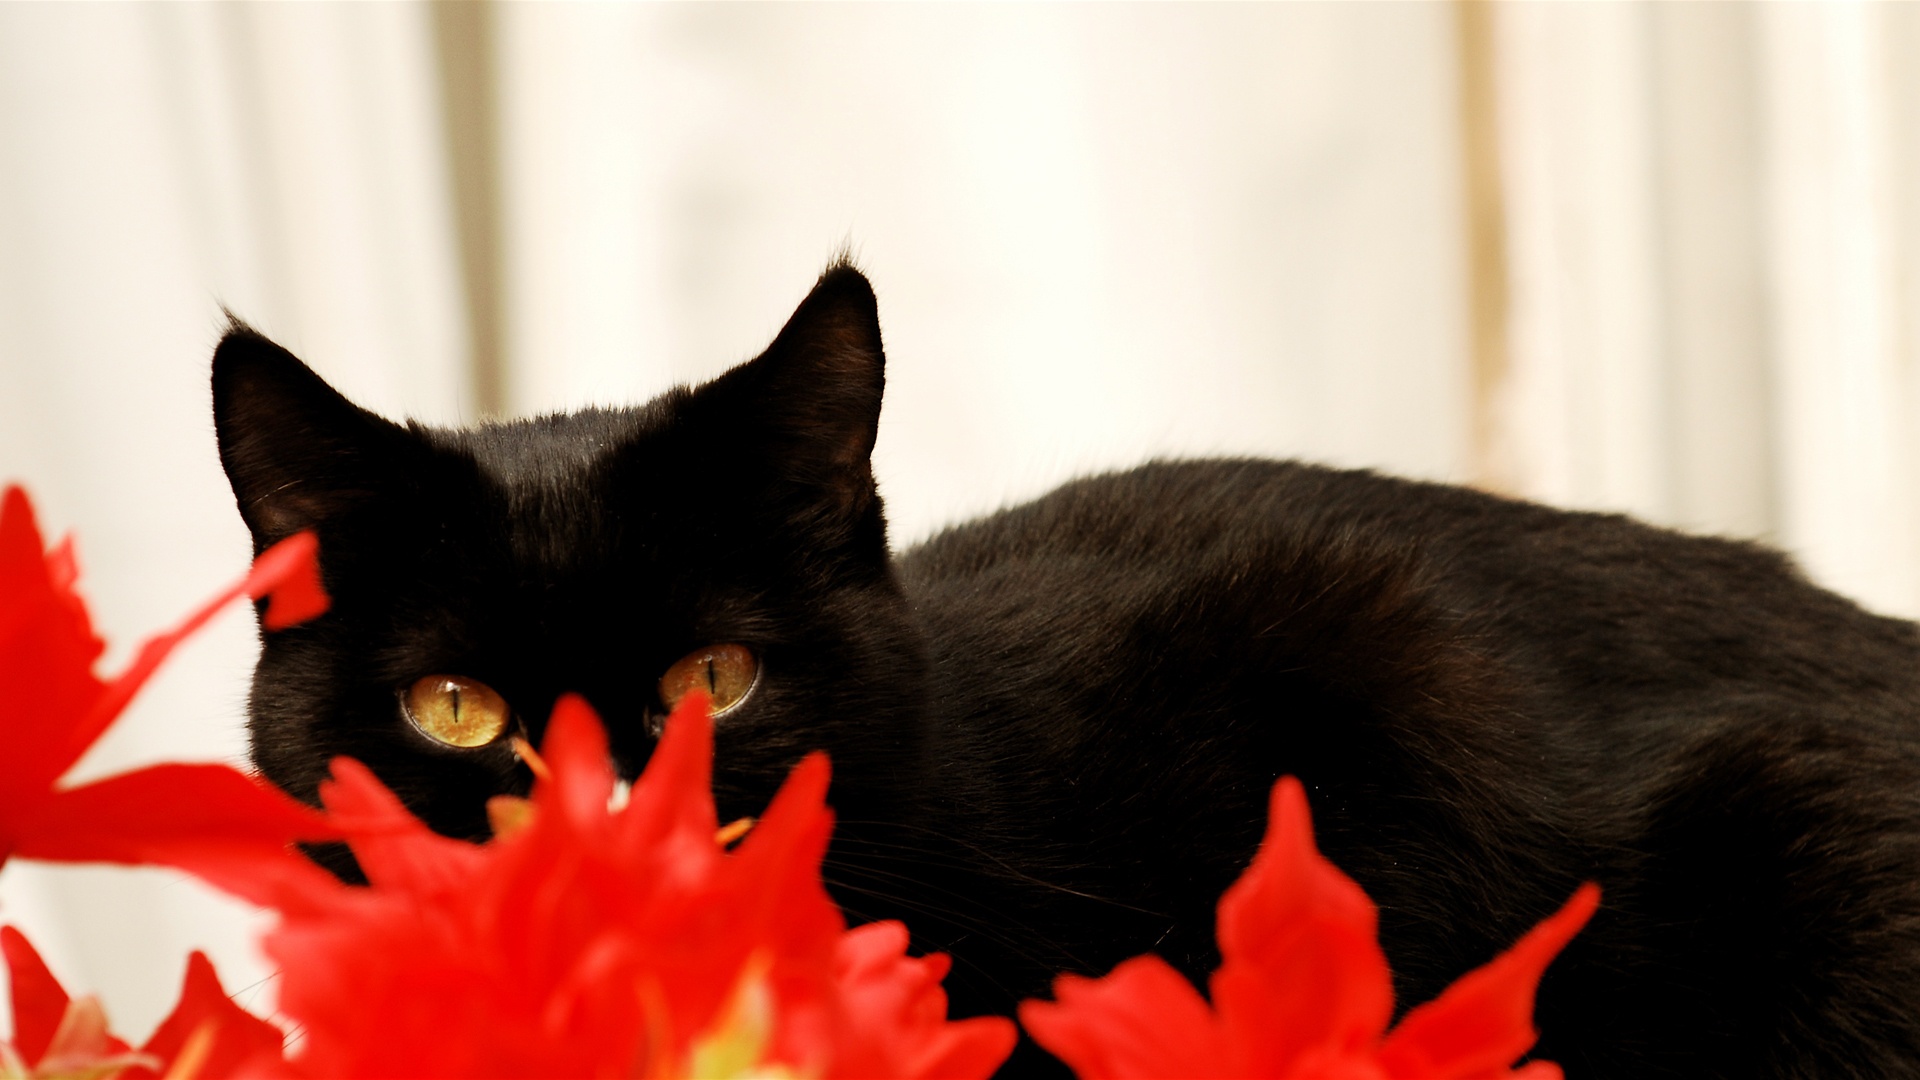 black cat and red flowers 1920x1080 Wallpaper